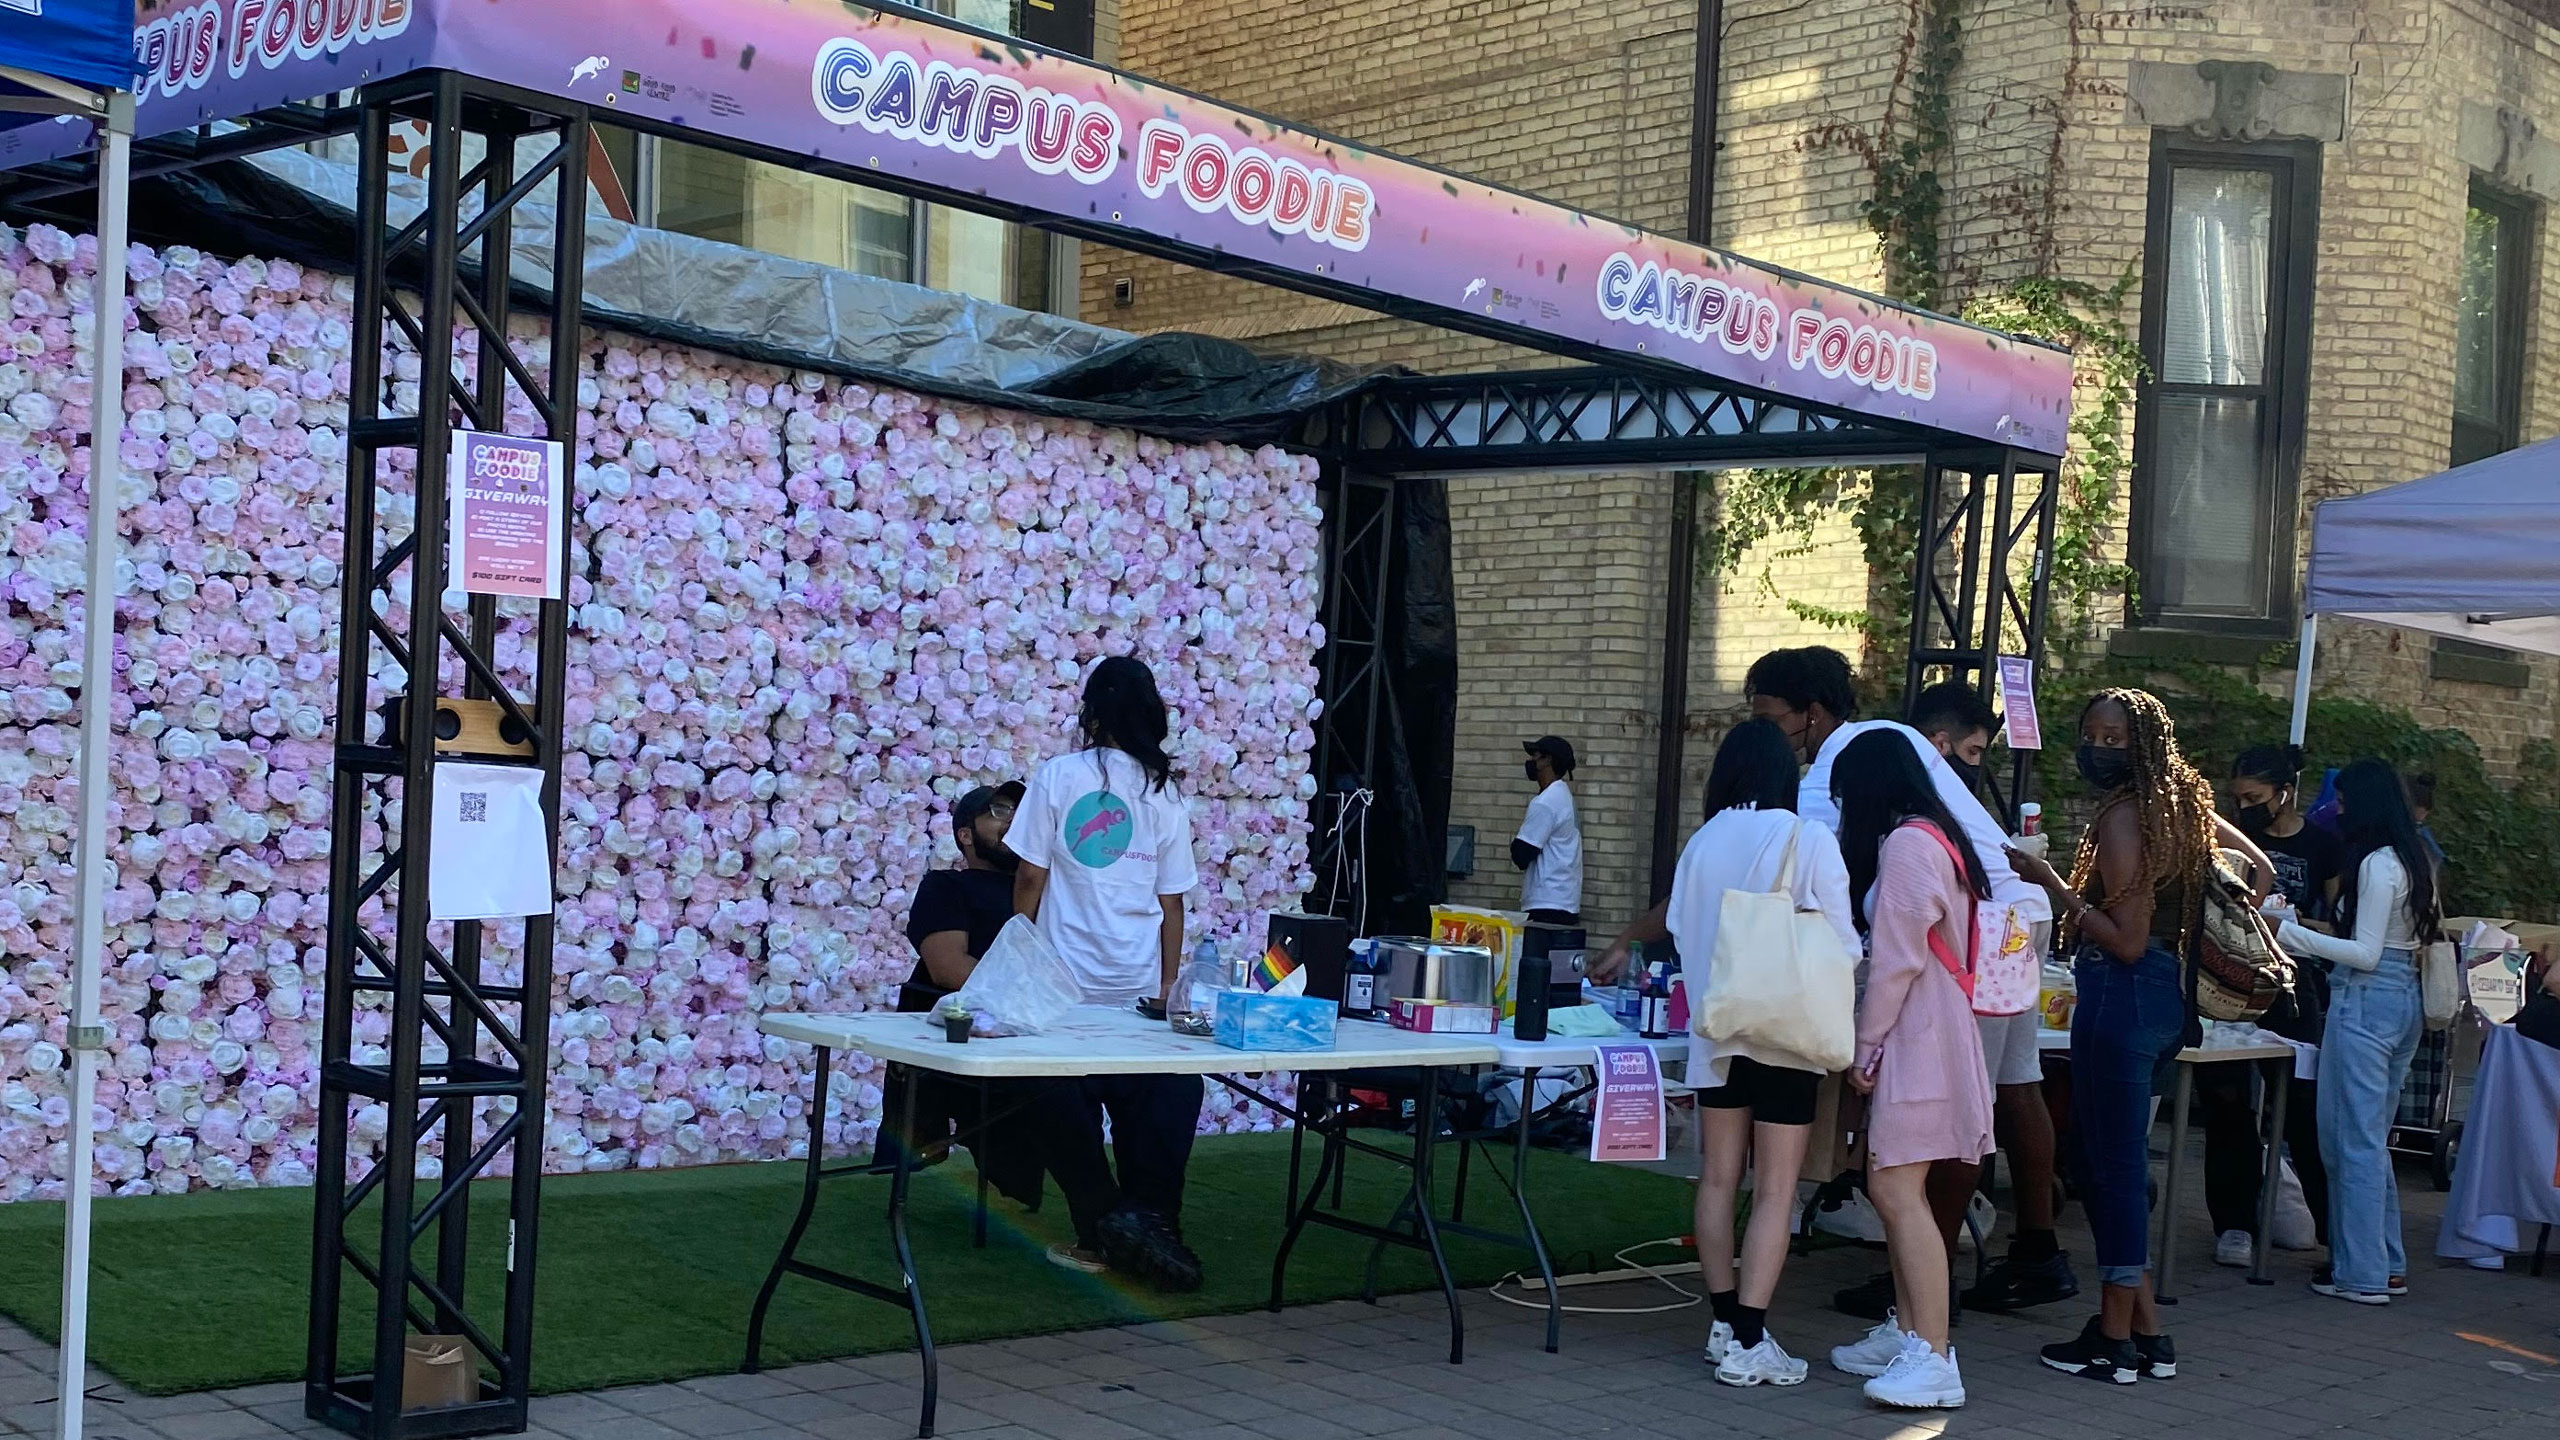 The Ryerson Students' Union table outside of the Ryerson Student Centre during Orientation Week in August 2021. Students are lined up for free food in front of the table while one person sits on another person's lap behind the table, in front of a large rose wall.